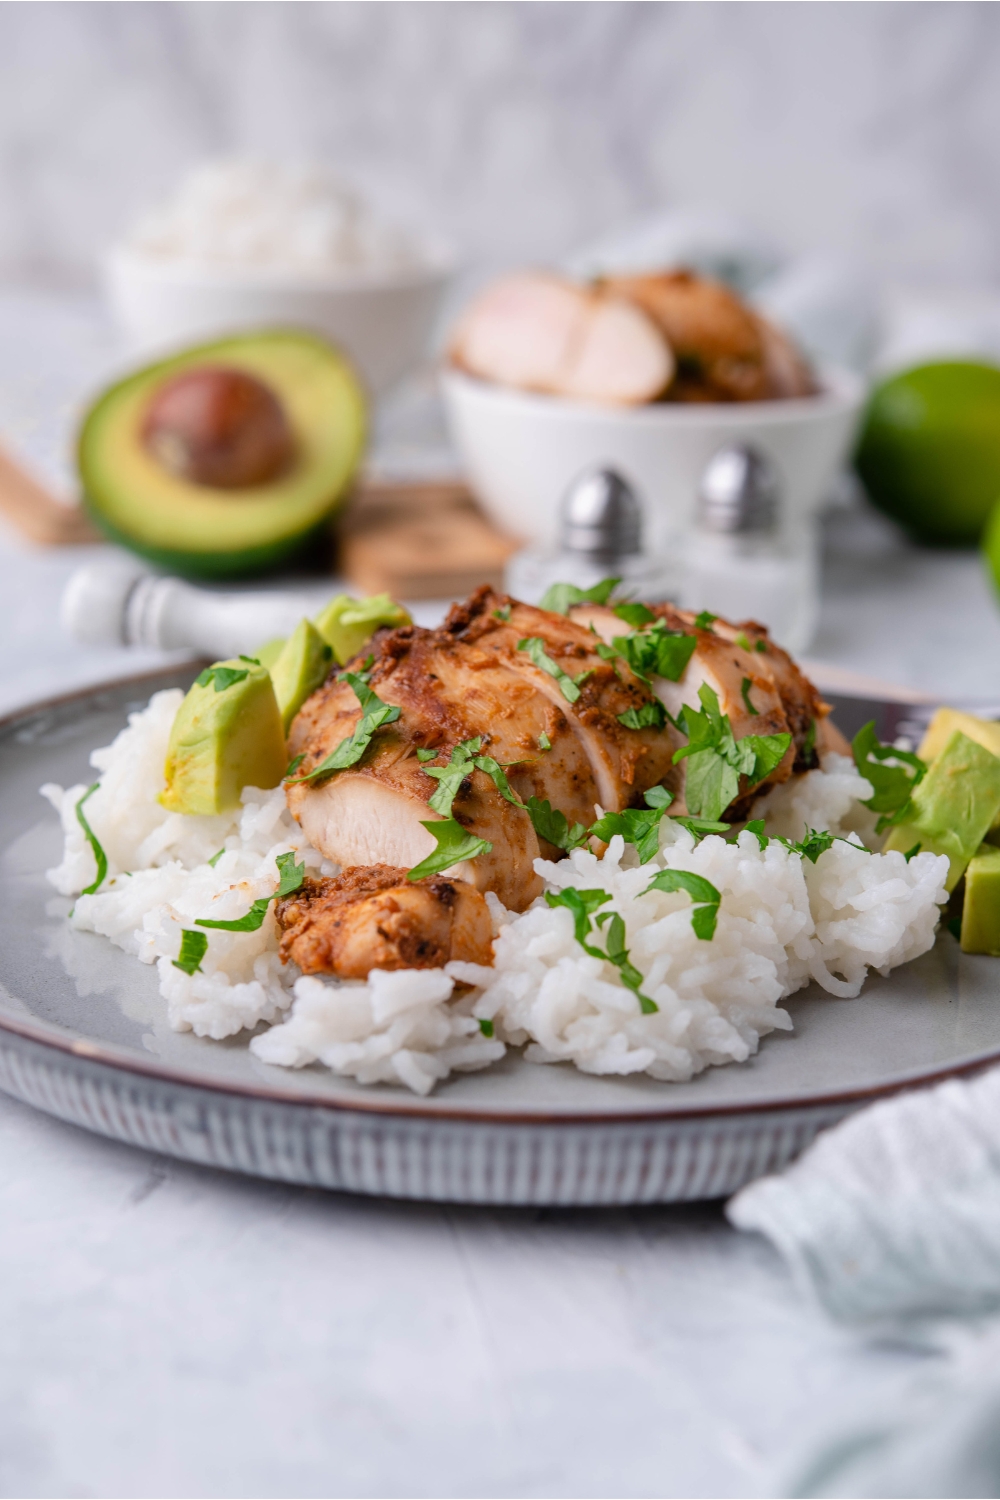 Chipotle chicken on a bed of white rice garnished with fresh herbs and diced avocado on a blue plate.